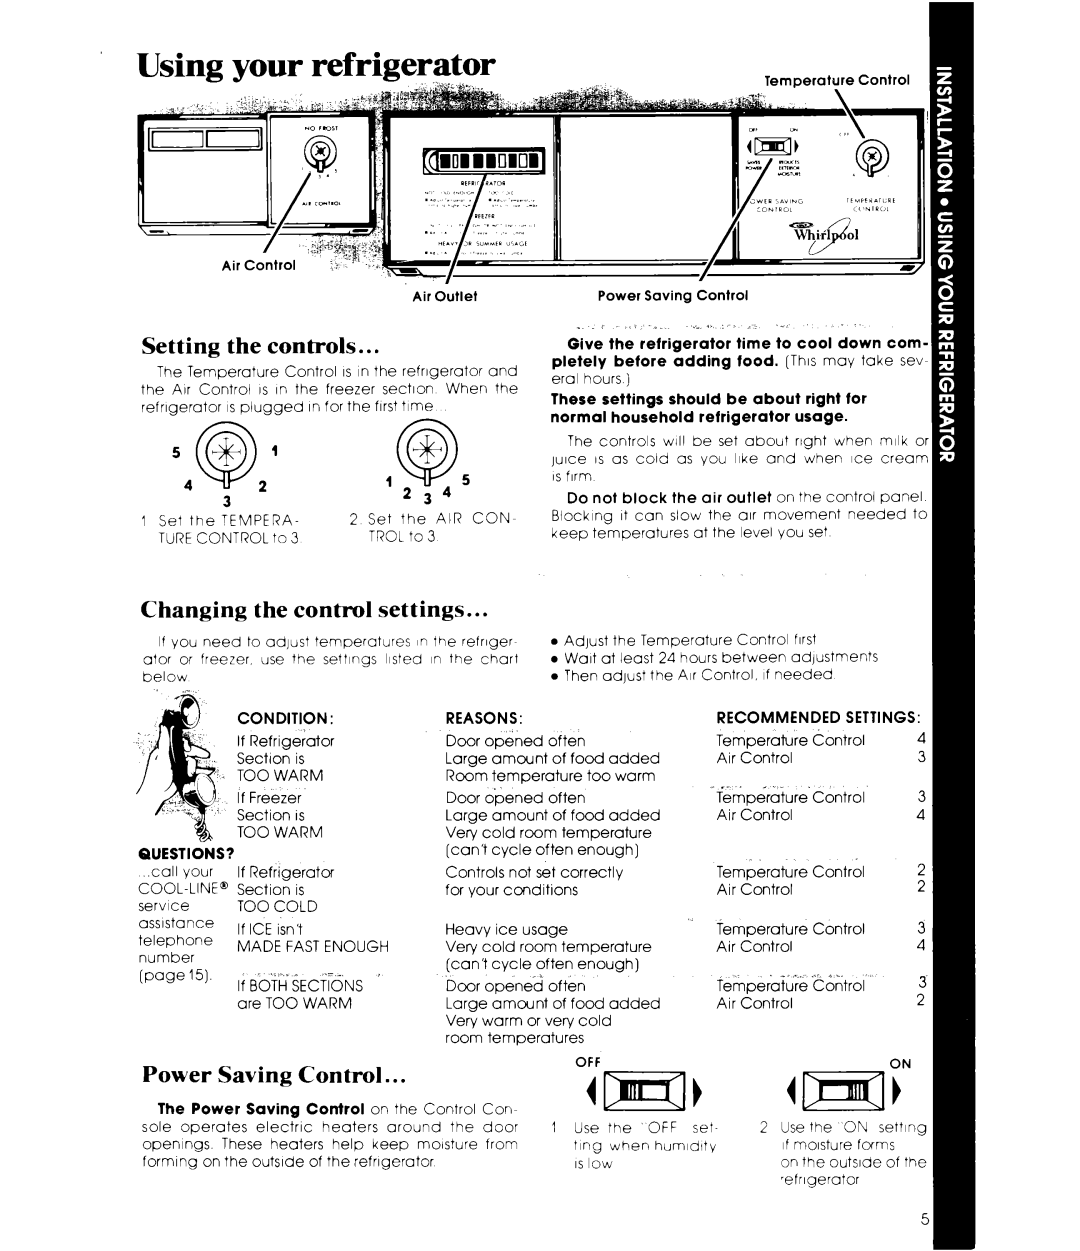 Whirlpool ED22ZM manual Usin, Setting the controls, Changing the control settings, Power Saving Control, 54@2’,g5 